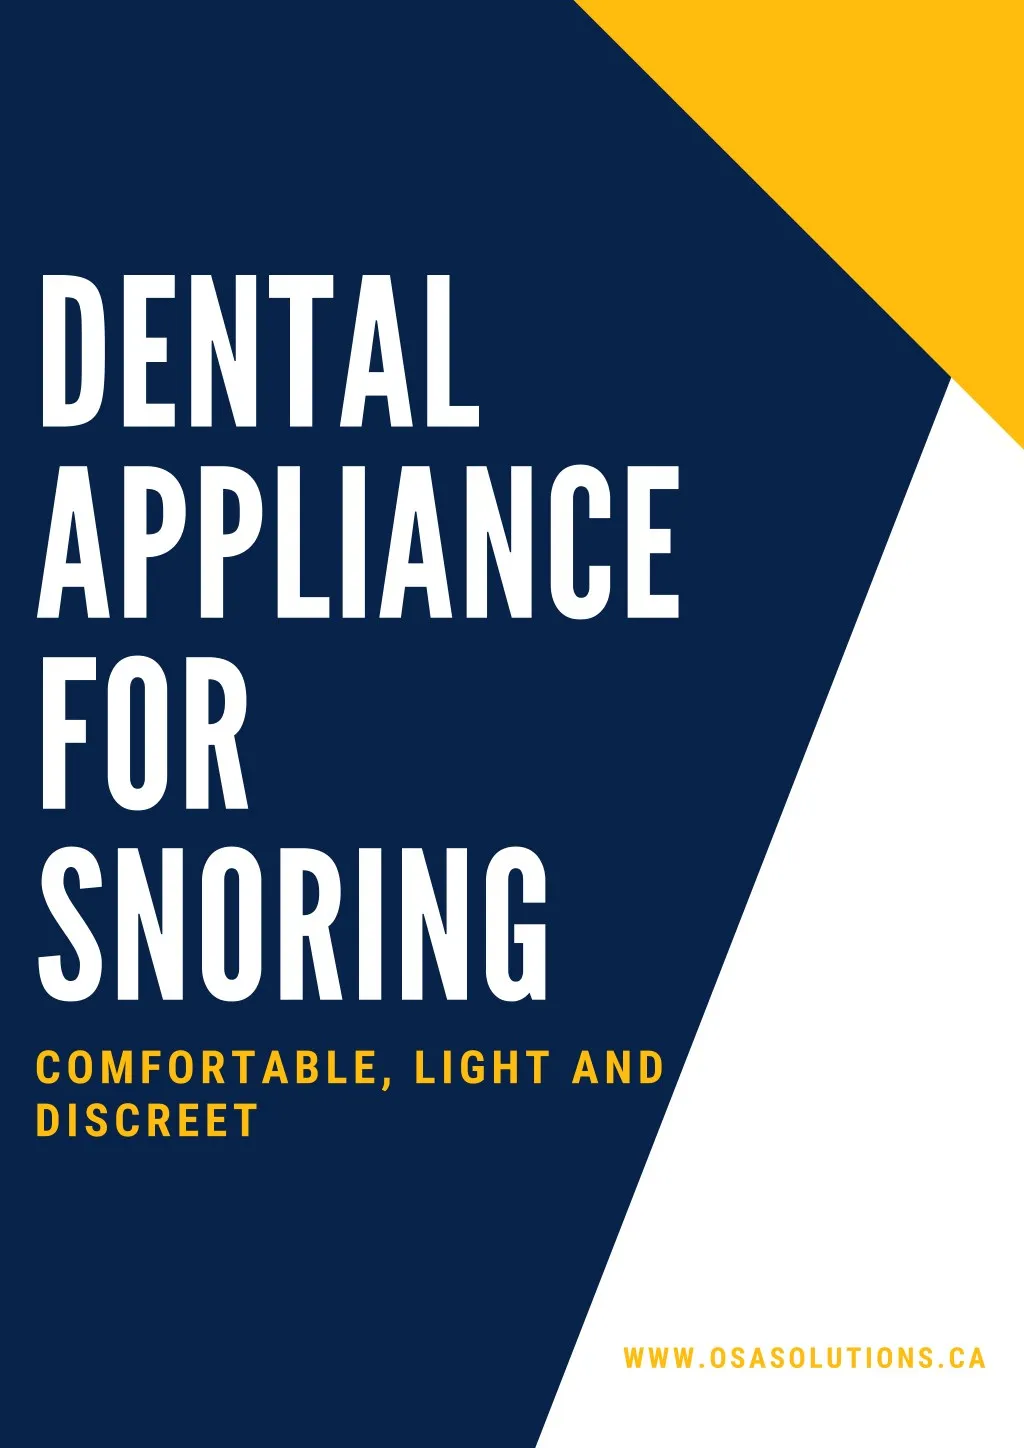 dent a l a ppli a nce for snoring comfortable